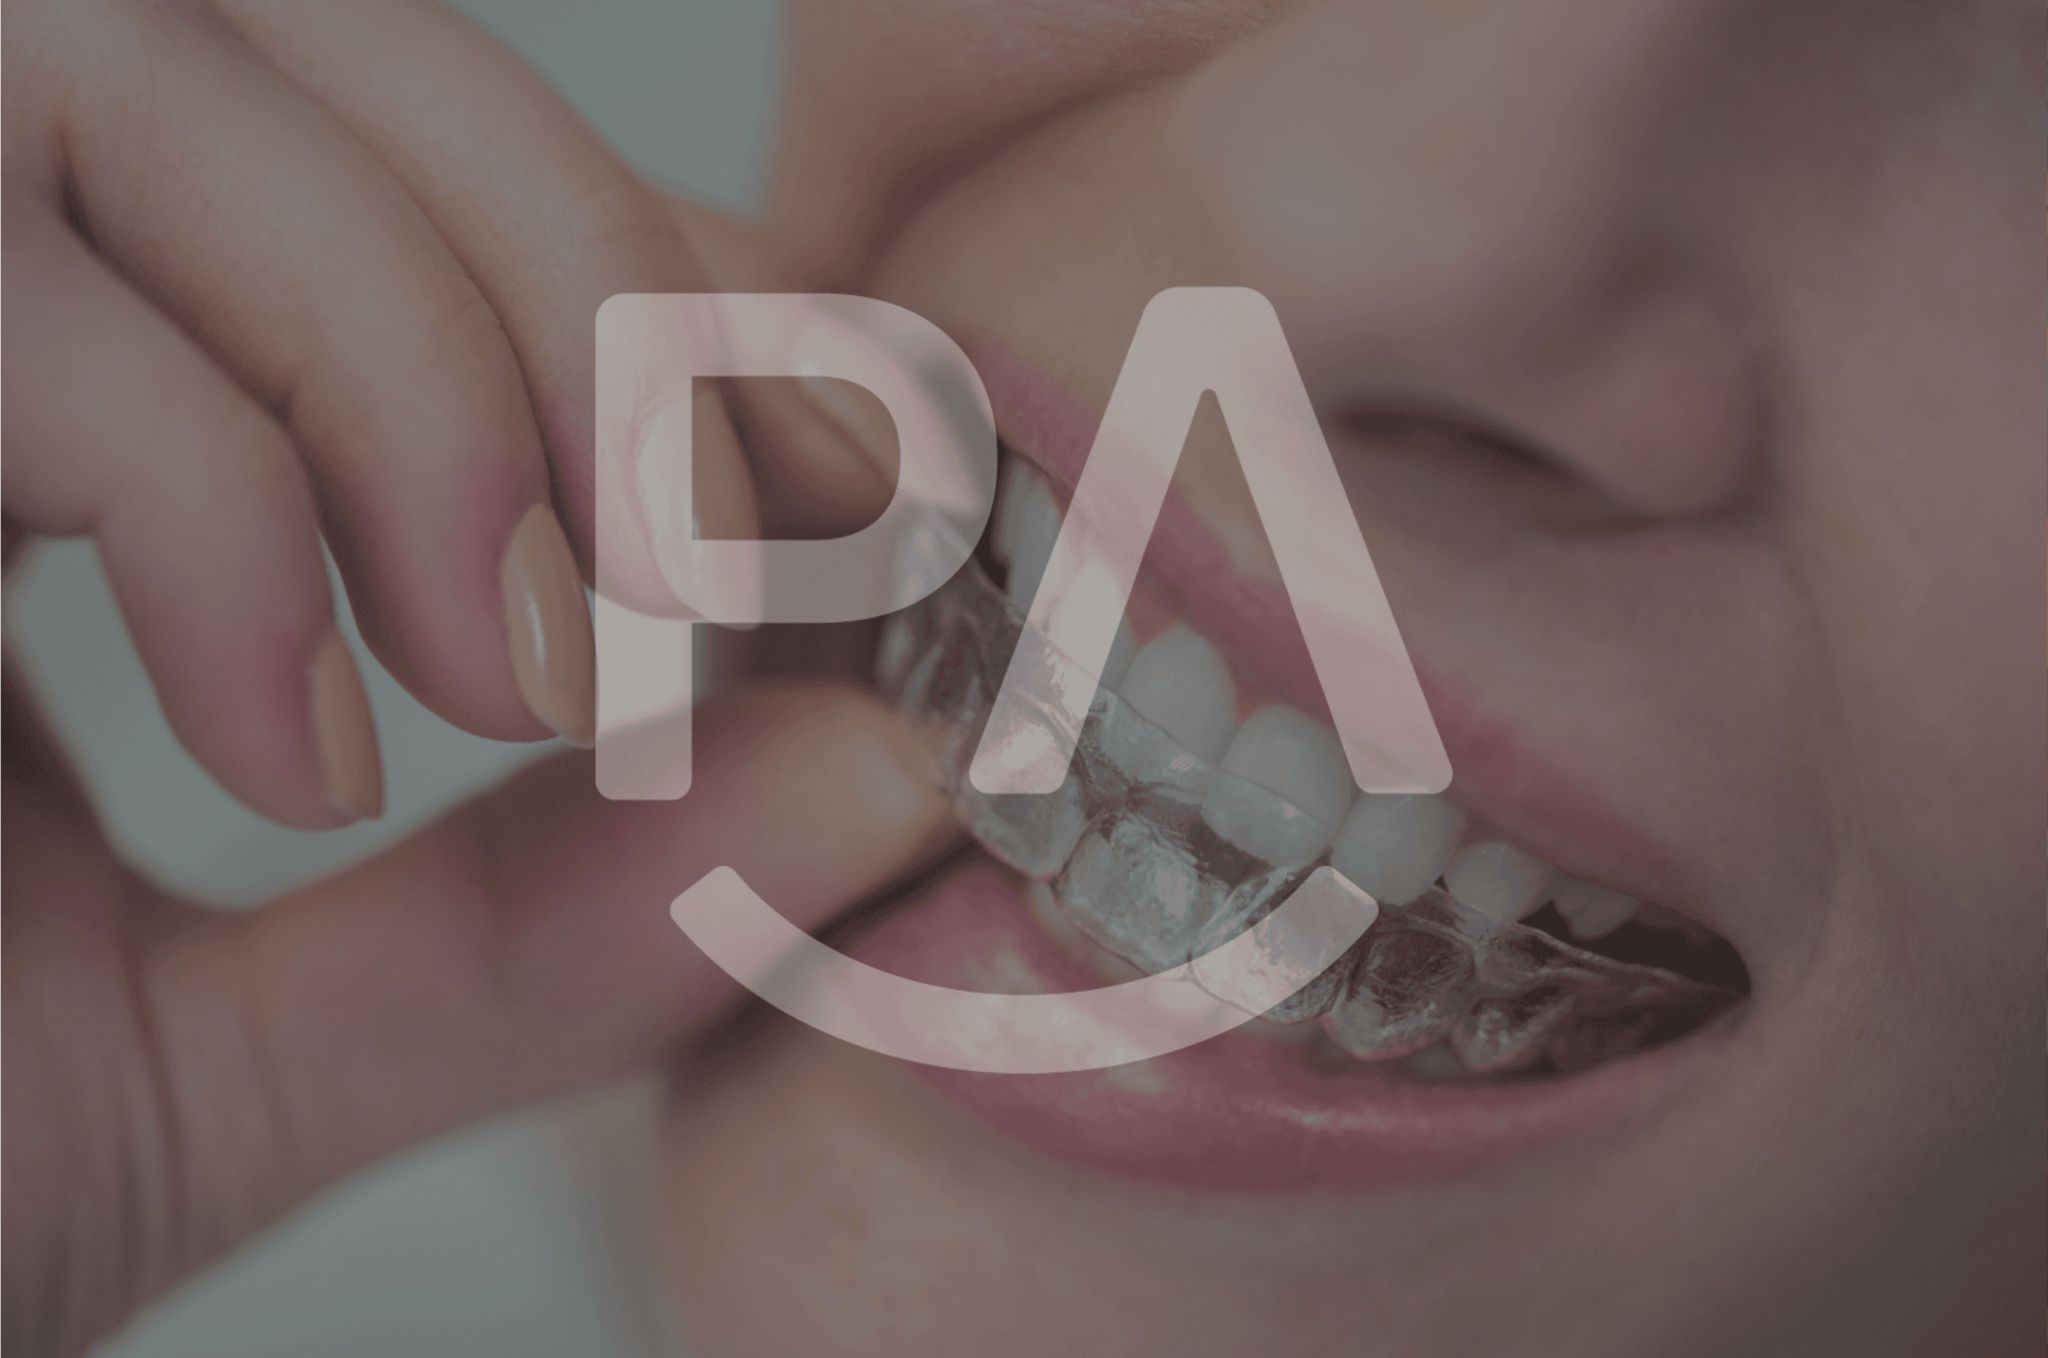 ParisAline Aligners, a discreet solution that’s revolutionizing the way people think about orthodontics. So, how exactly do these aligners make an impact?